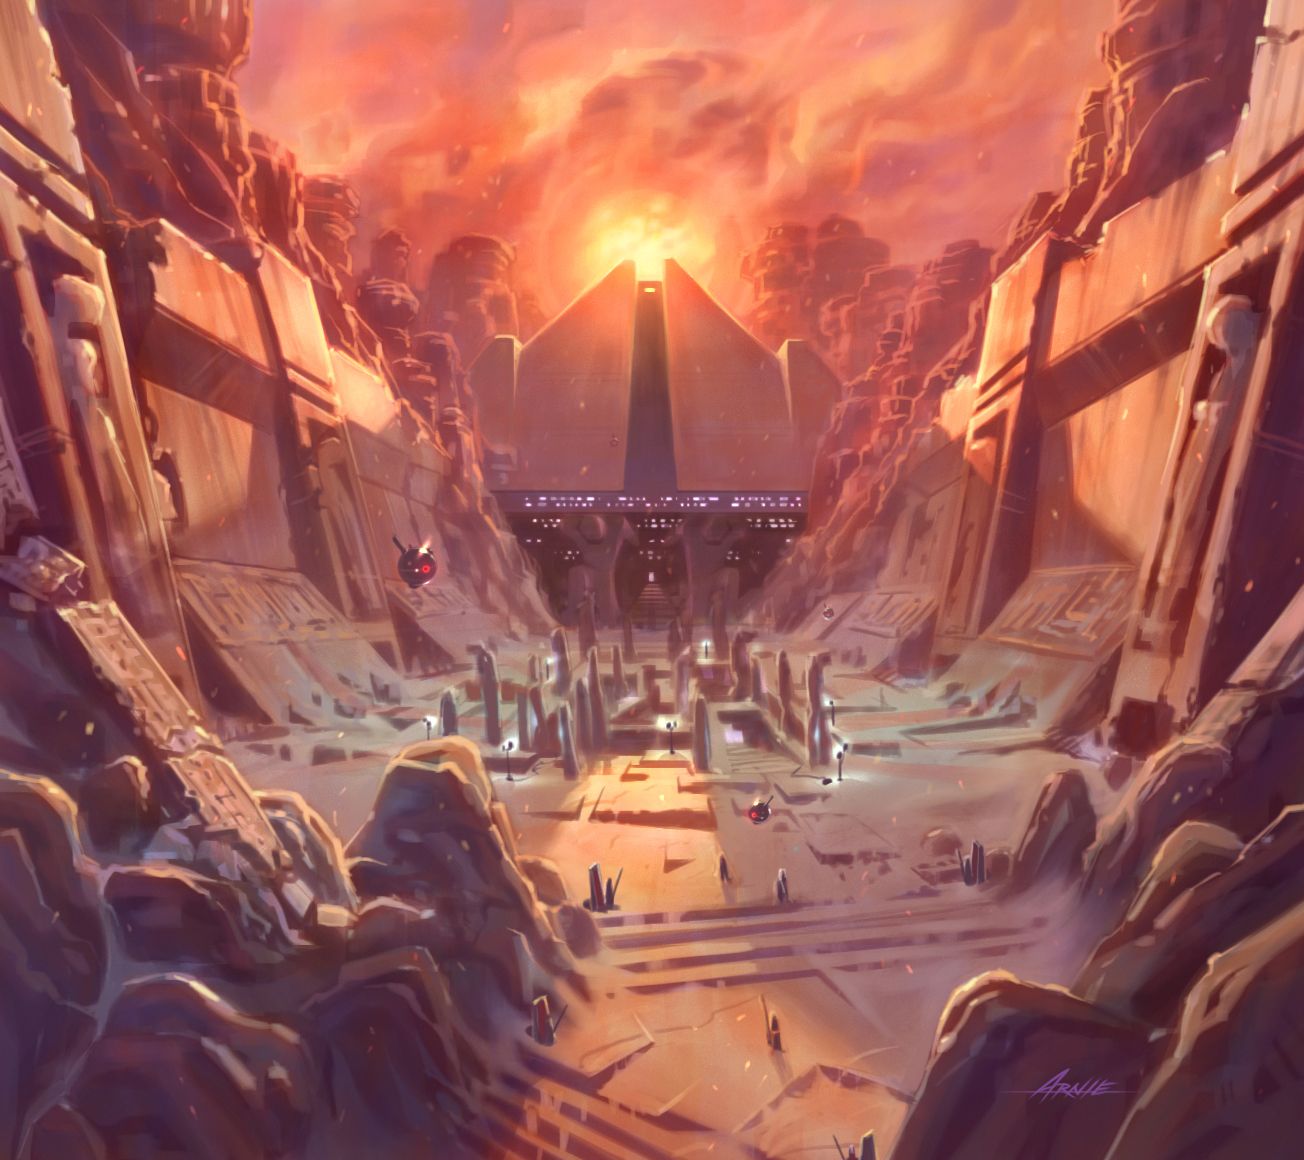 Concept art of the Sith Academy from Star Wars: The Old Republic